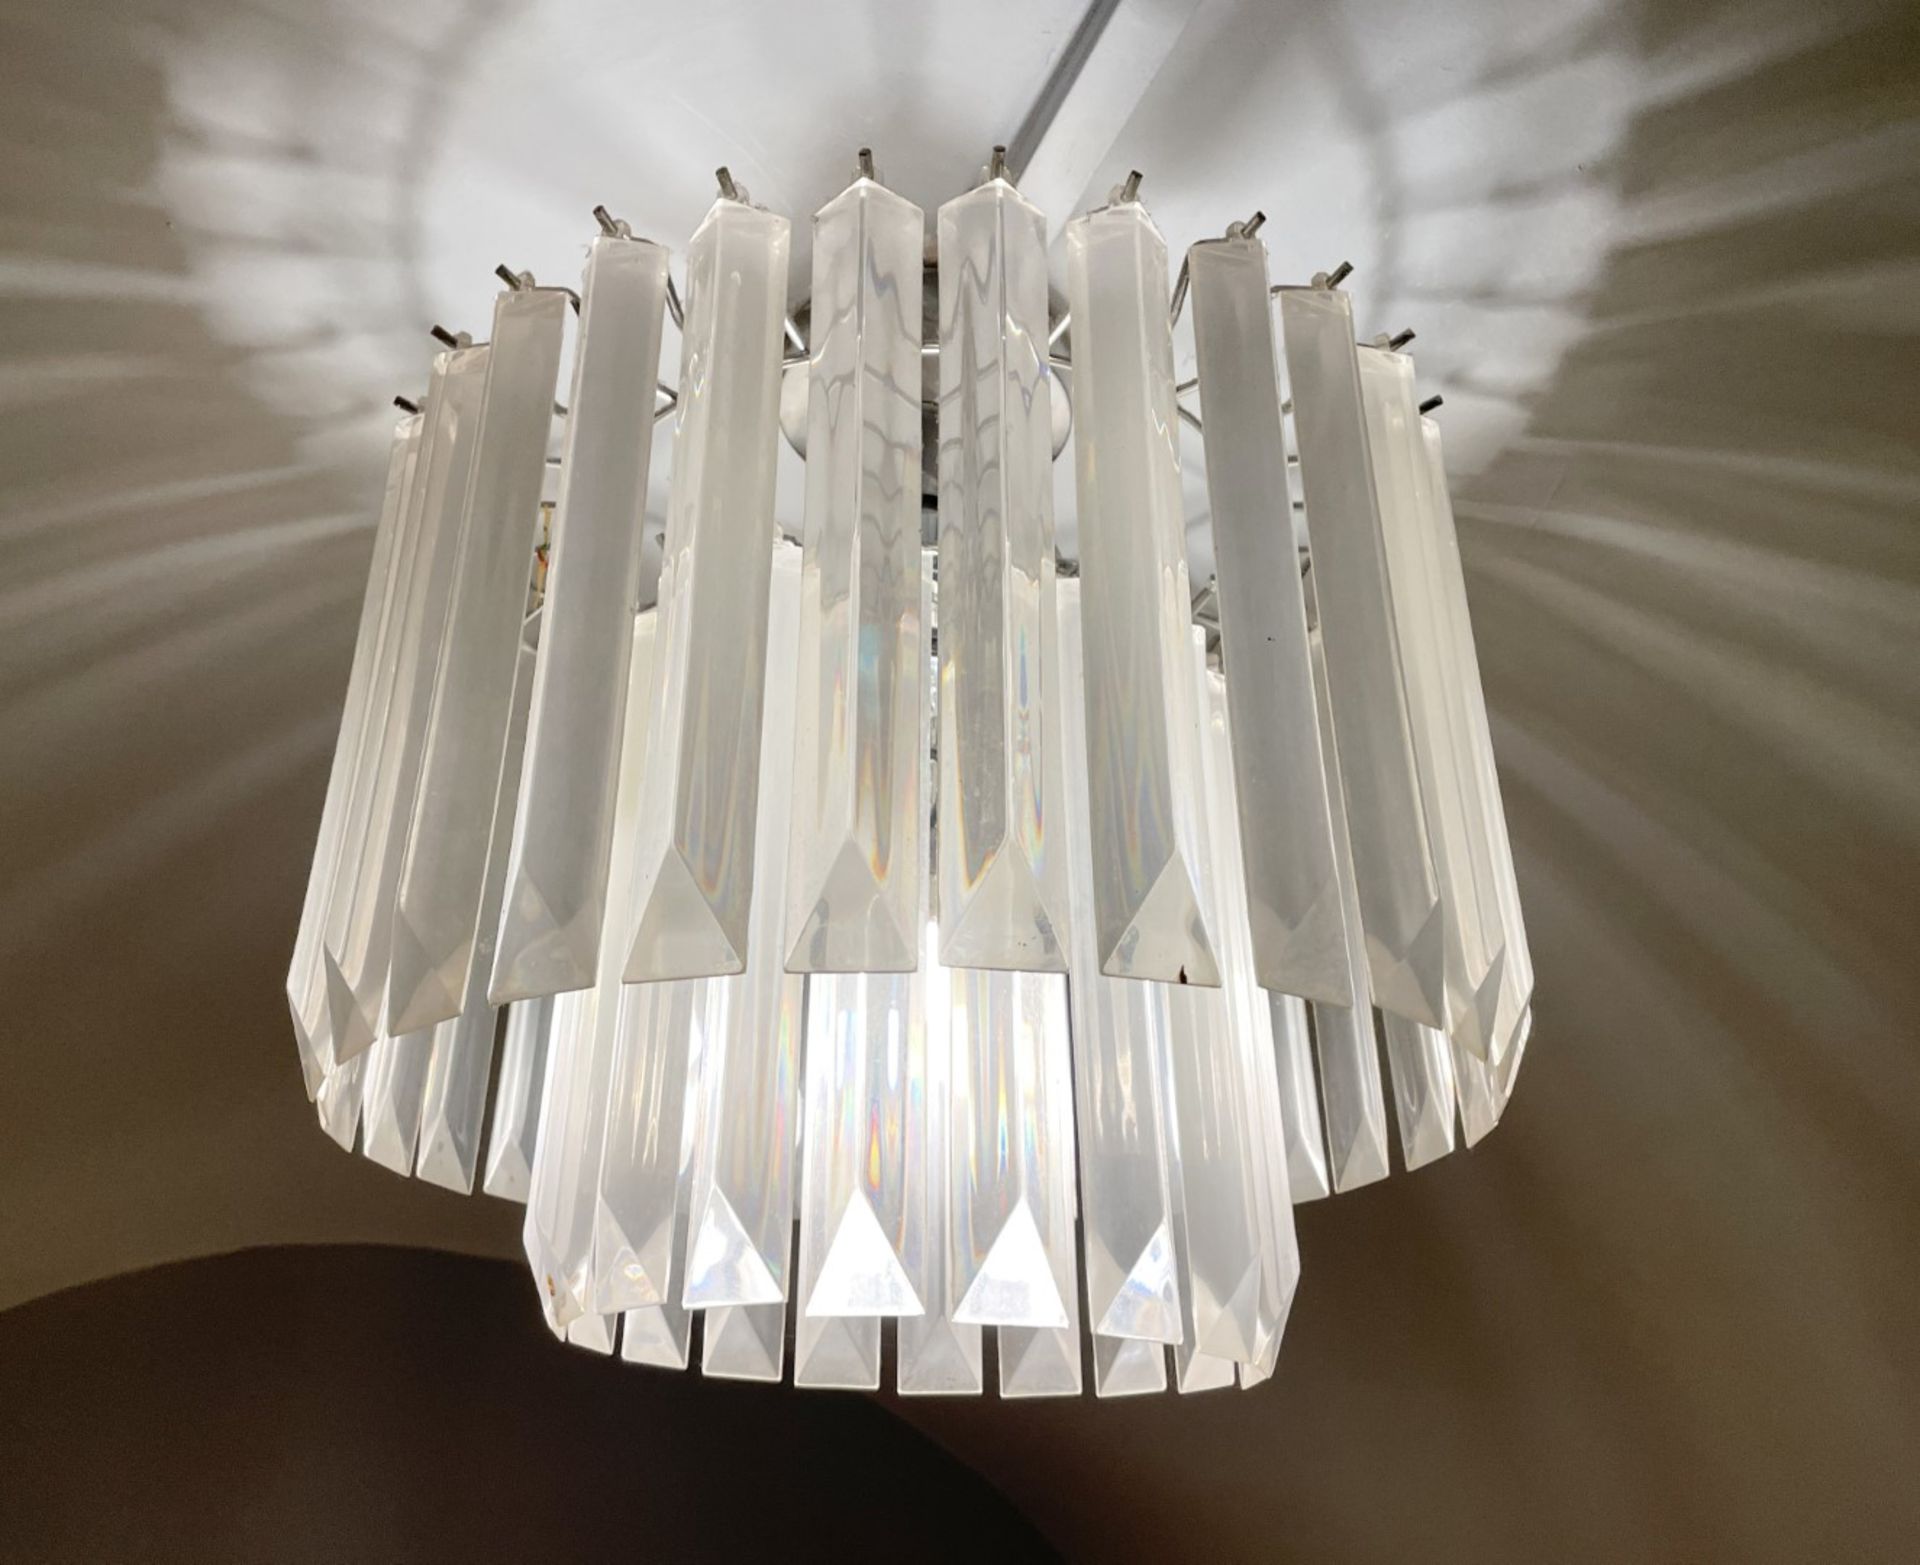 1 x Ceiling Pendant Chandelier Light Fitting Featuring 2-Tiers Of Long Droplets - Image 2 of 3